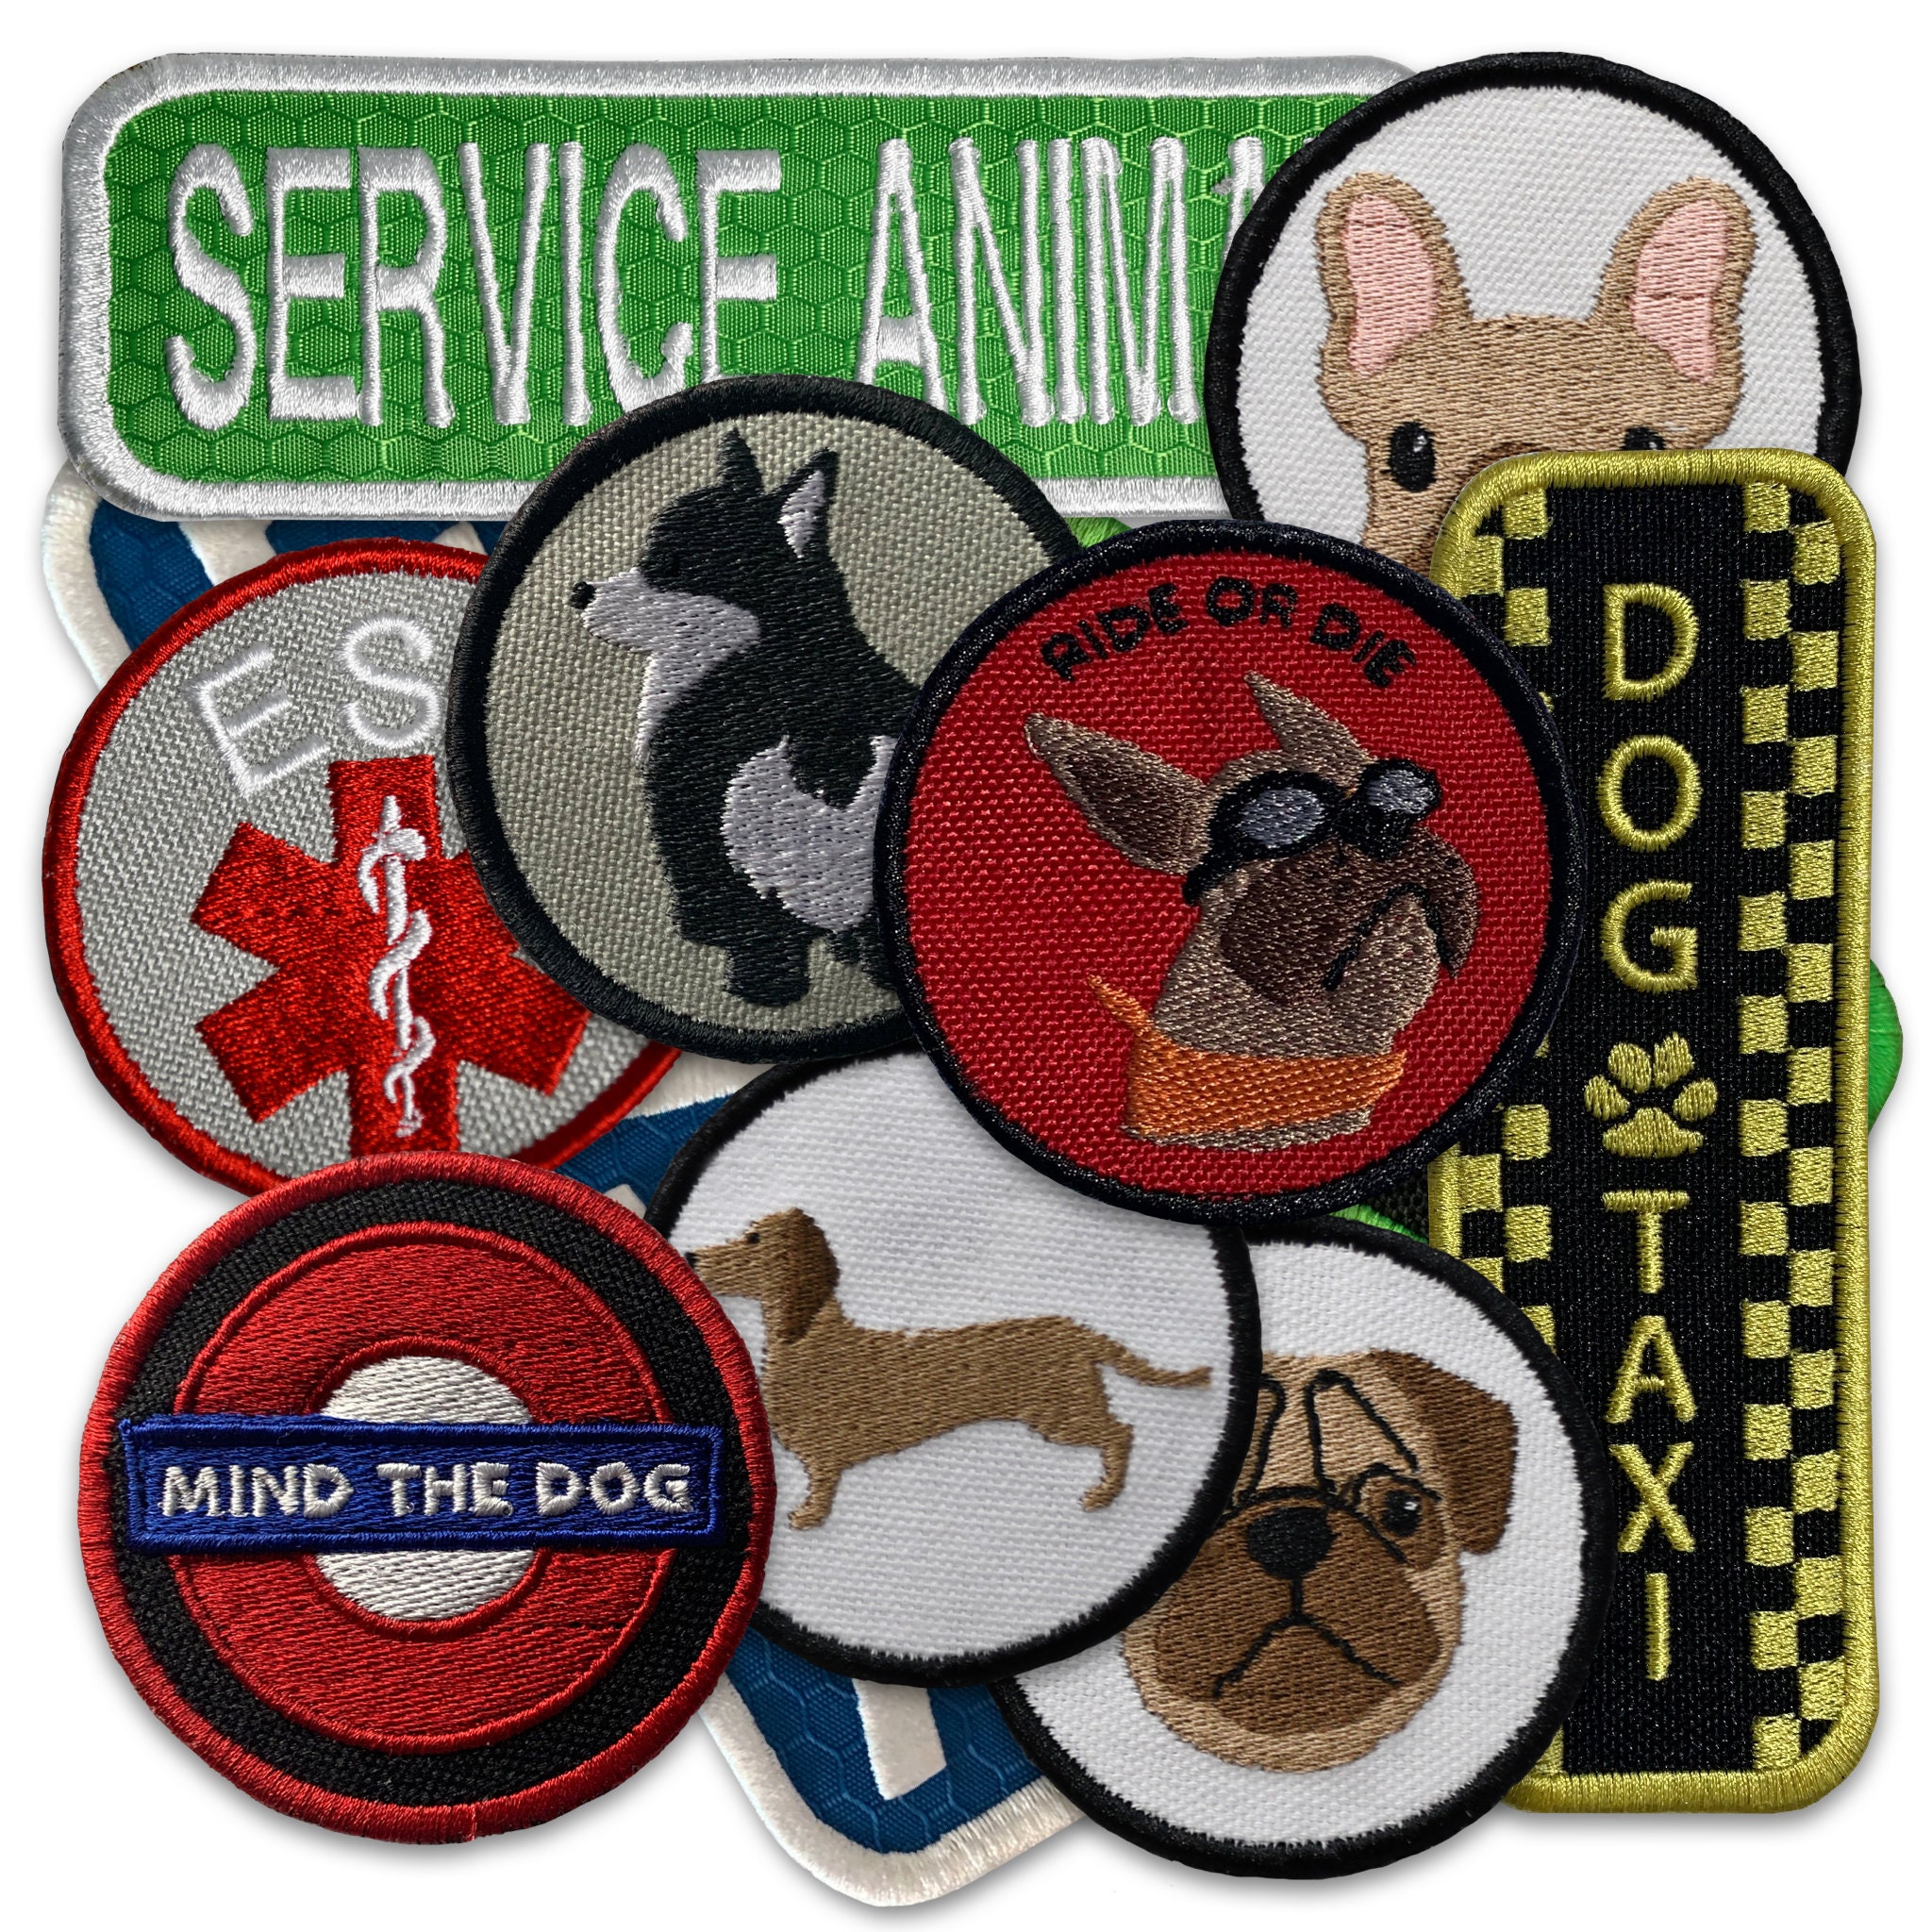 CUSTOM Embroidered Velcro Patch - DO NOT PET – Bing's Pets